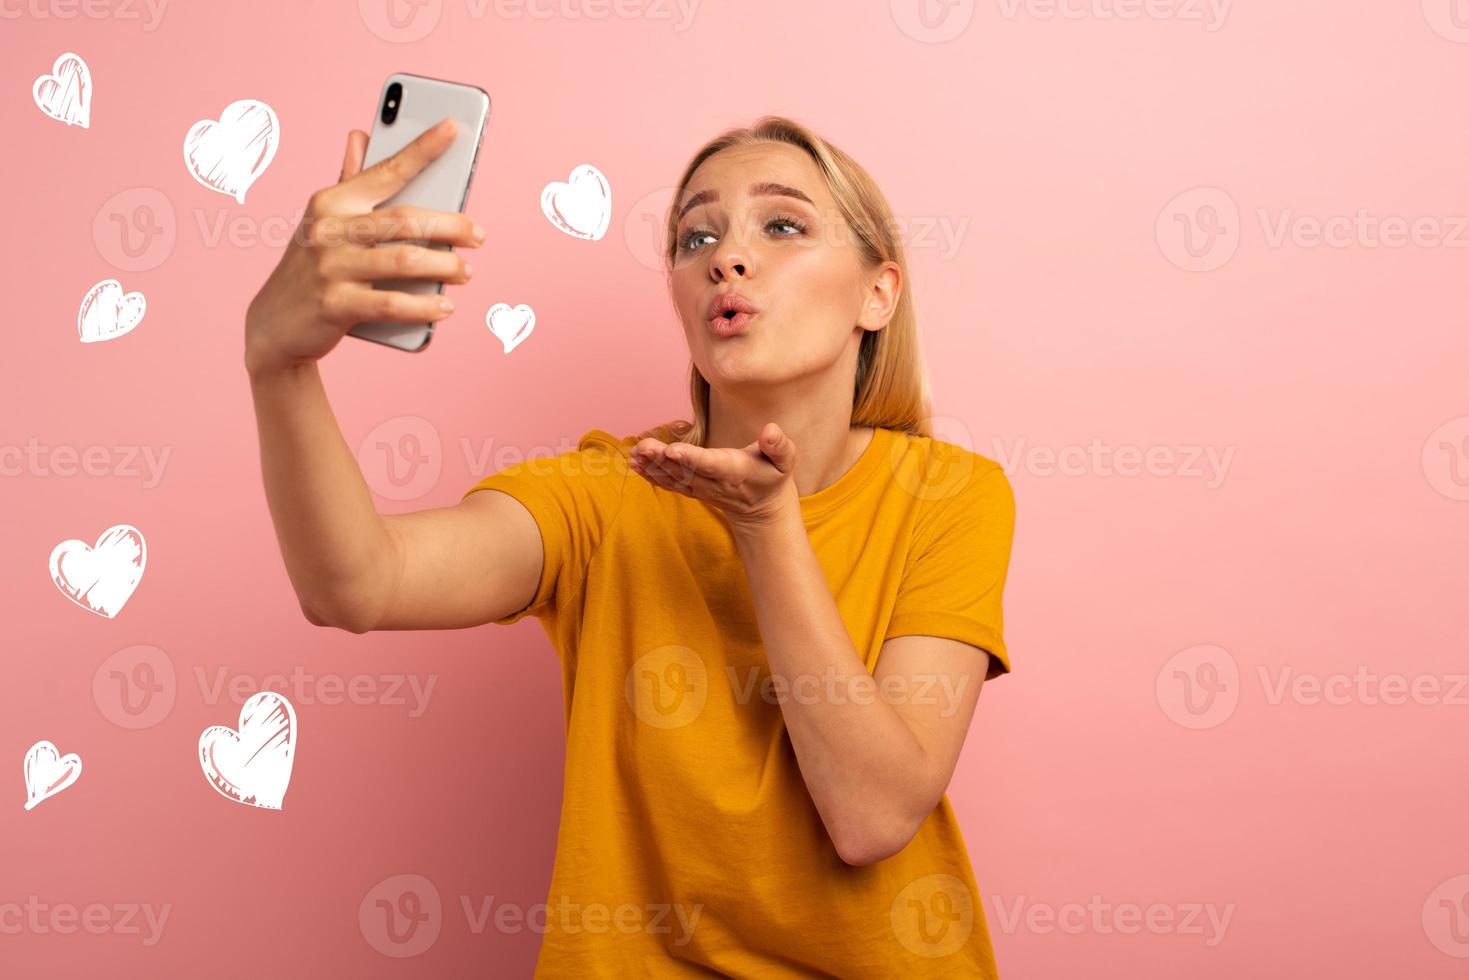 Blonde cute girl sends hearts on her smartphone. Happy and lovely expression face. Pink background photo